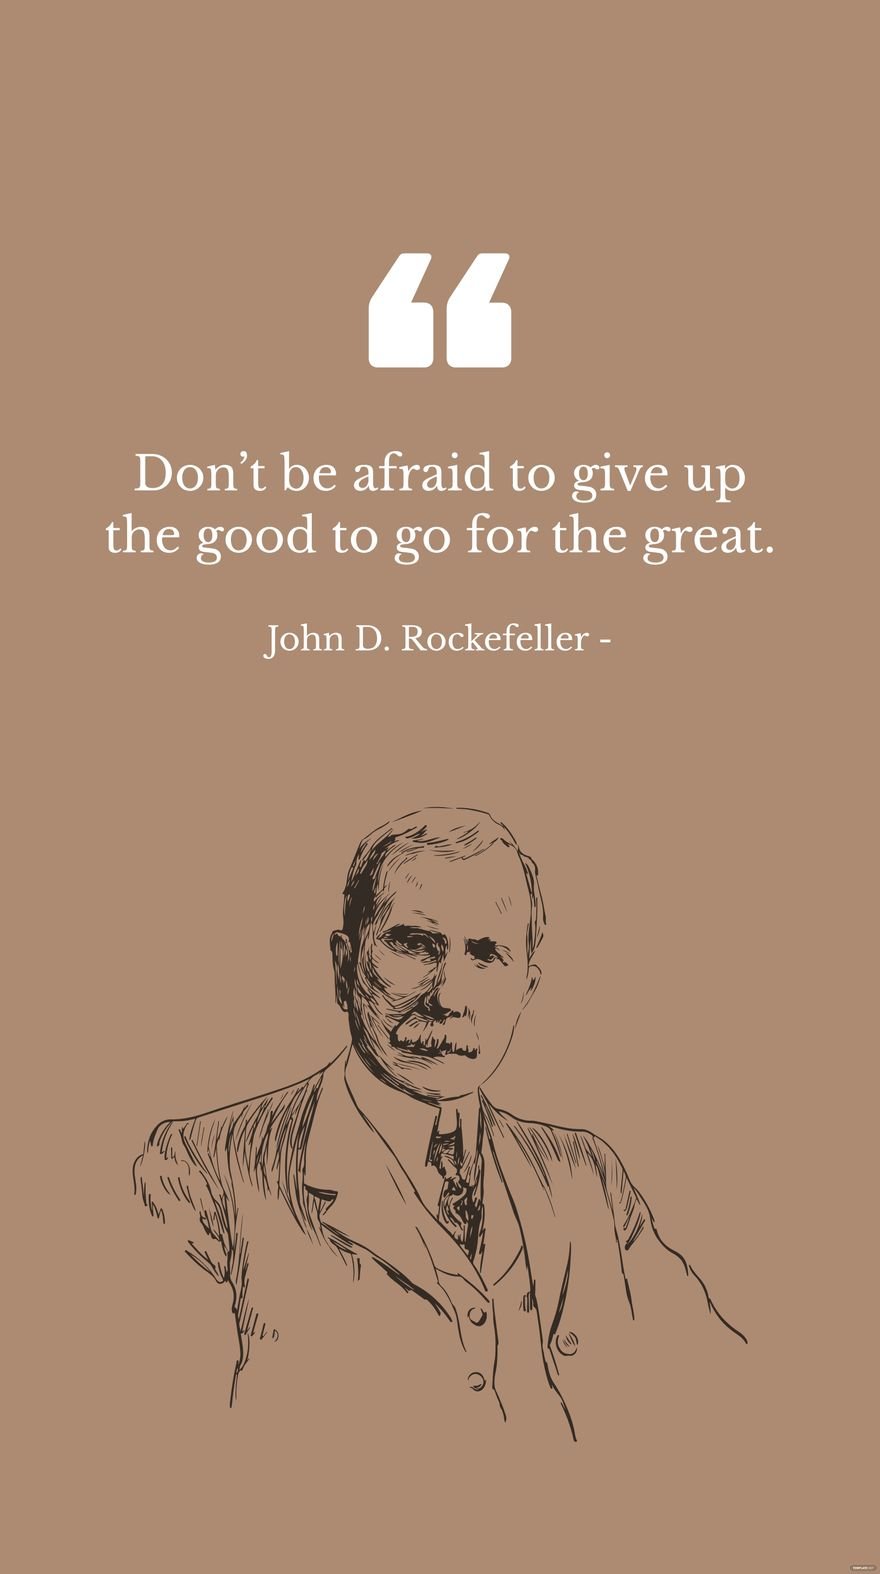 John D. Rockefeller - Don’t be afraid to give up the good to go for the great. in JPG